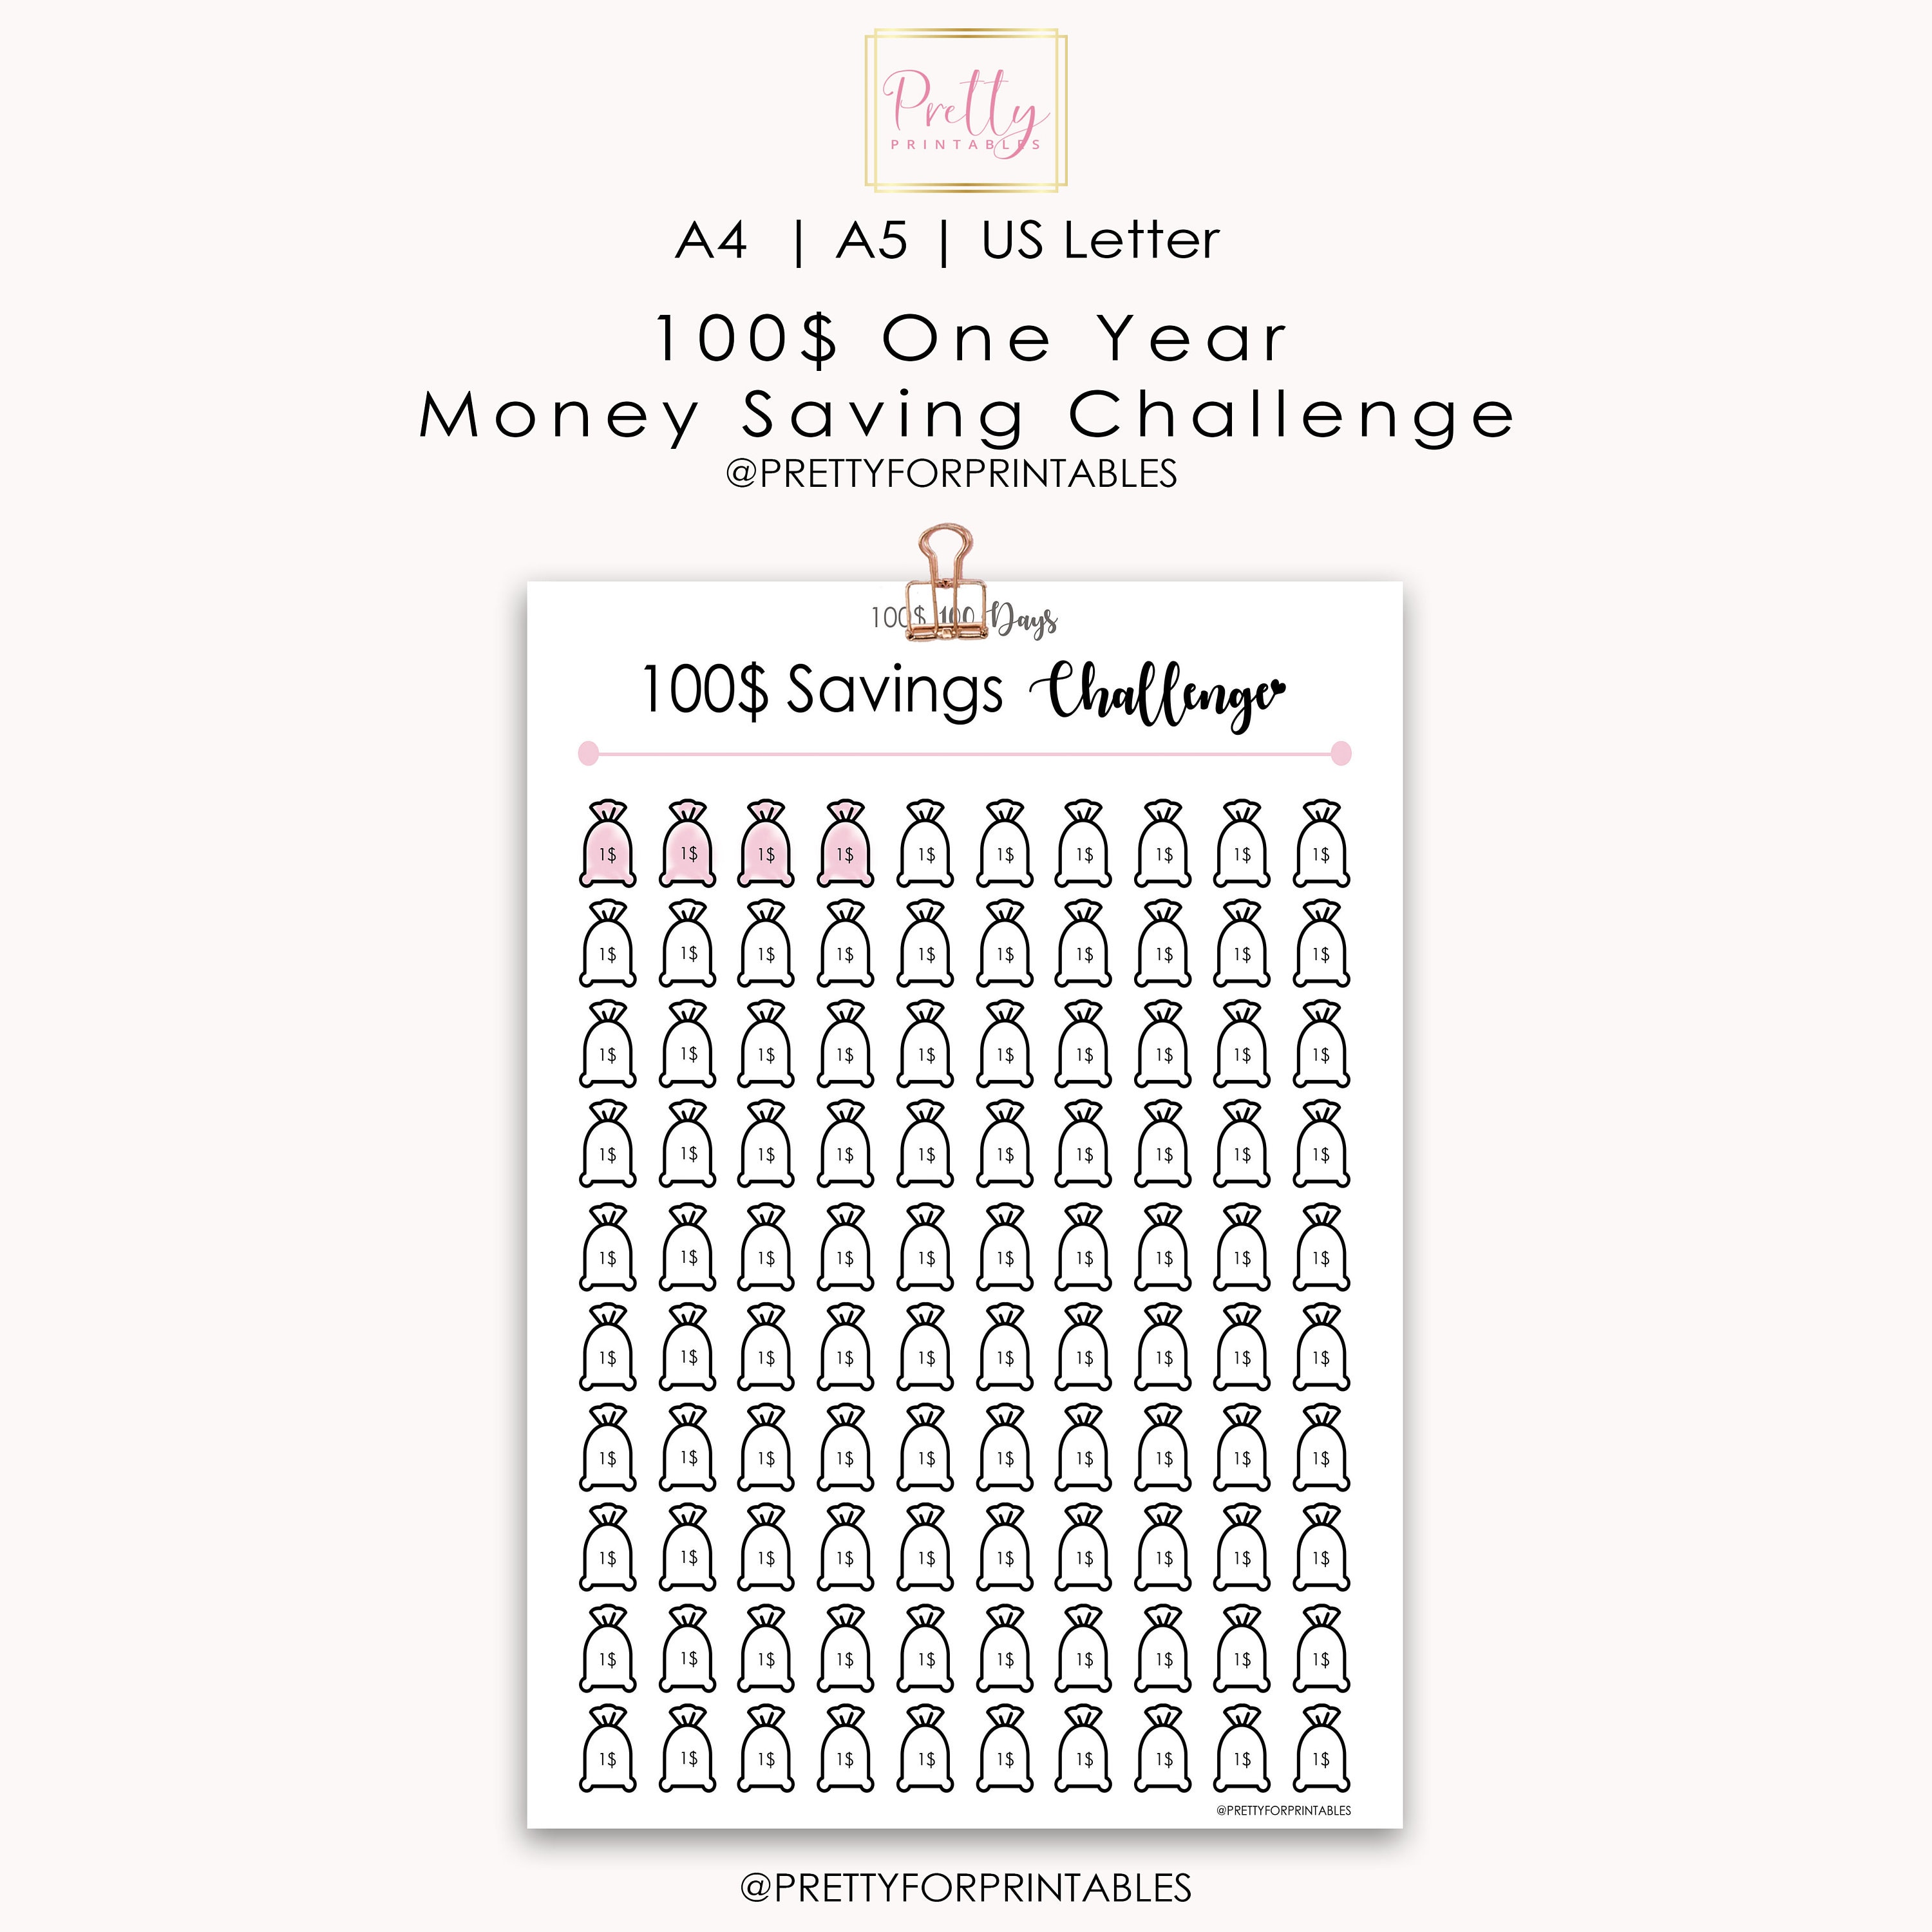 calendars-planners-paper-party-supplies-printable-pdf-5-sizes-5k-savings-tracker-chart